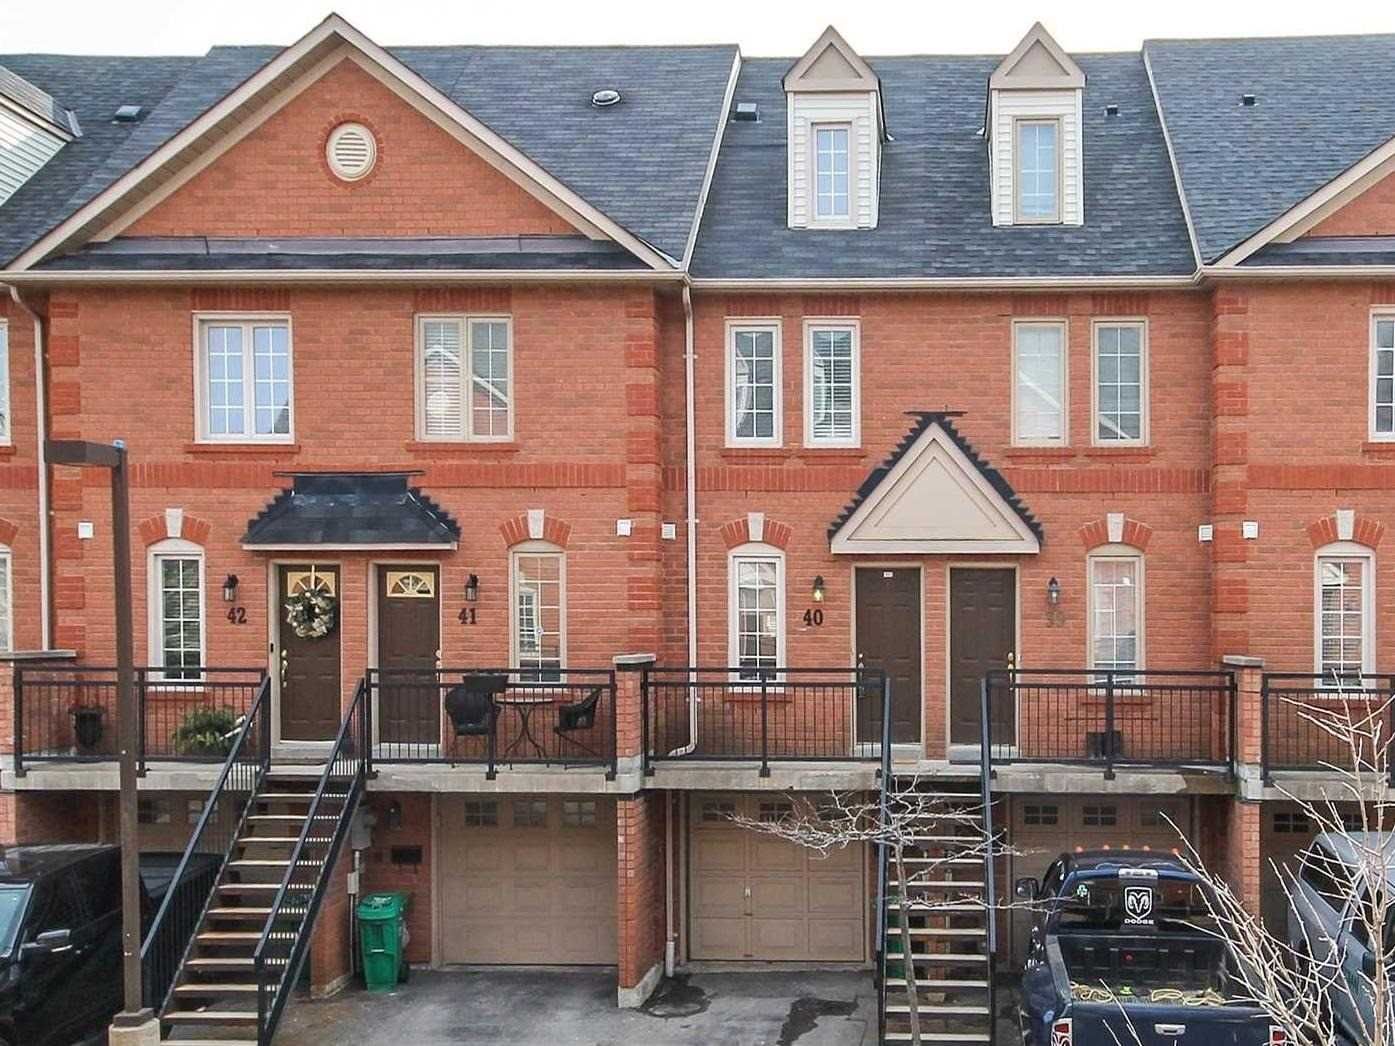 3895 Doug Leavens Boulevard. 3895 Doug Leavens Boulevard Townhomes is located in  Mississauga, Toronto - image #3 of 3